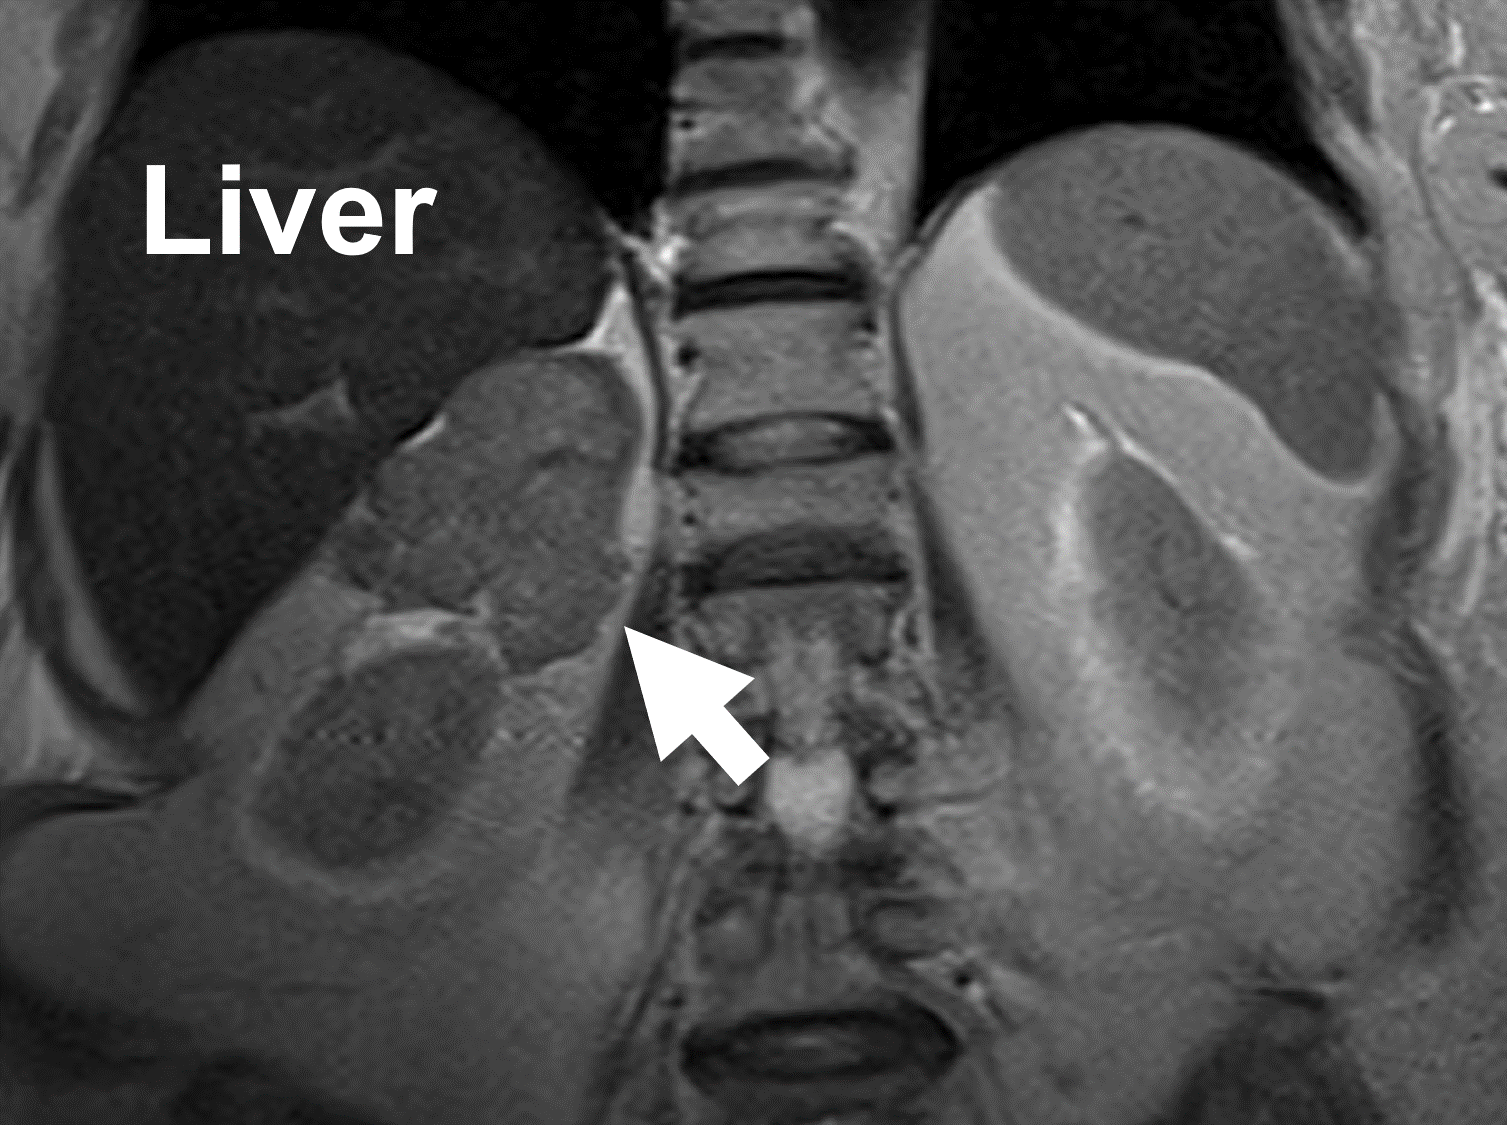 MRI showing an adrenal cancer (arrow) arising from the right adrenal gland. Note the heterogeneity and irregular borders.